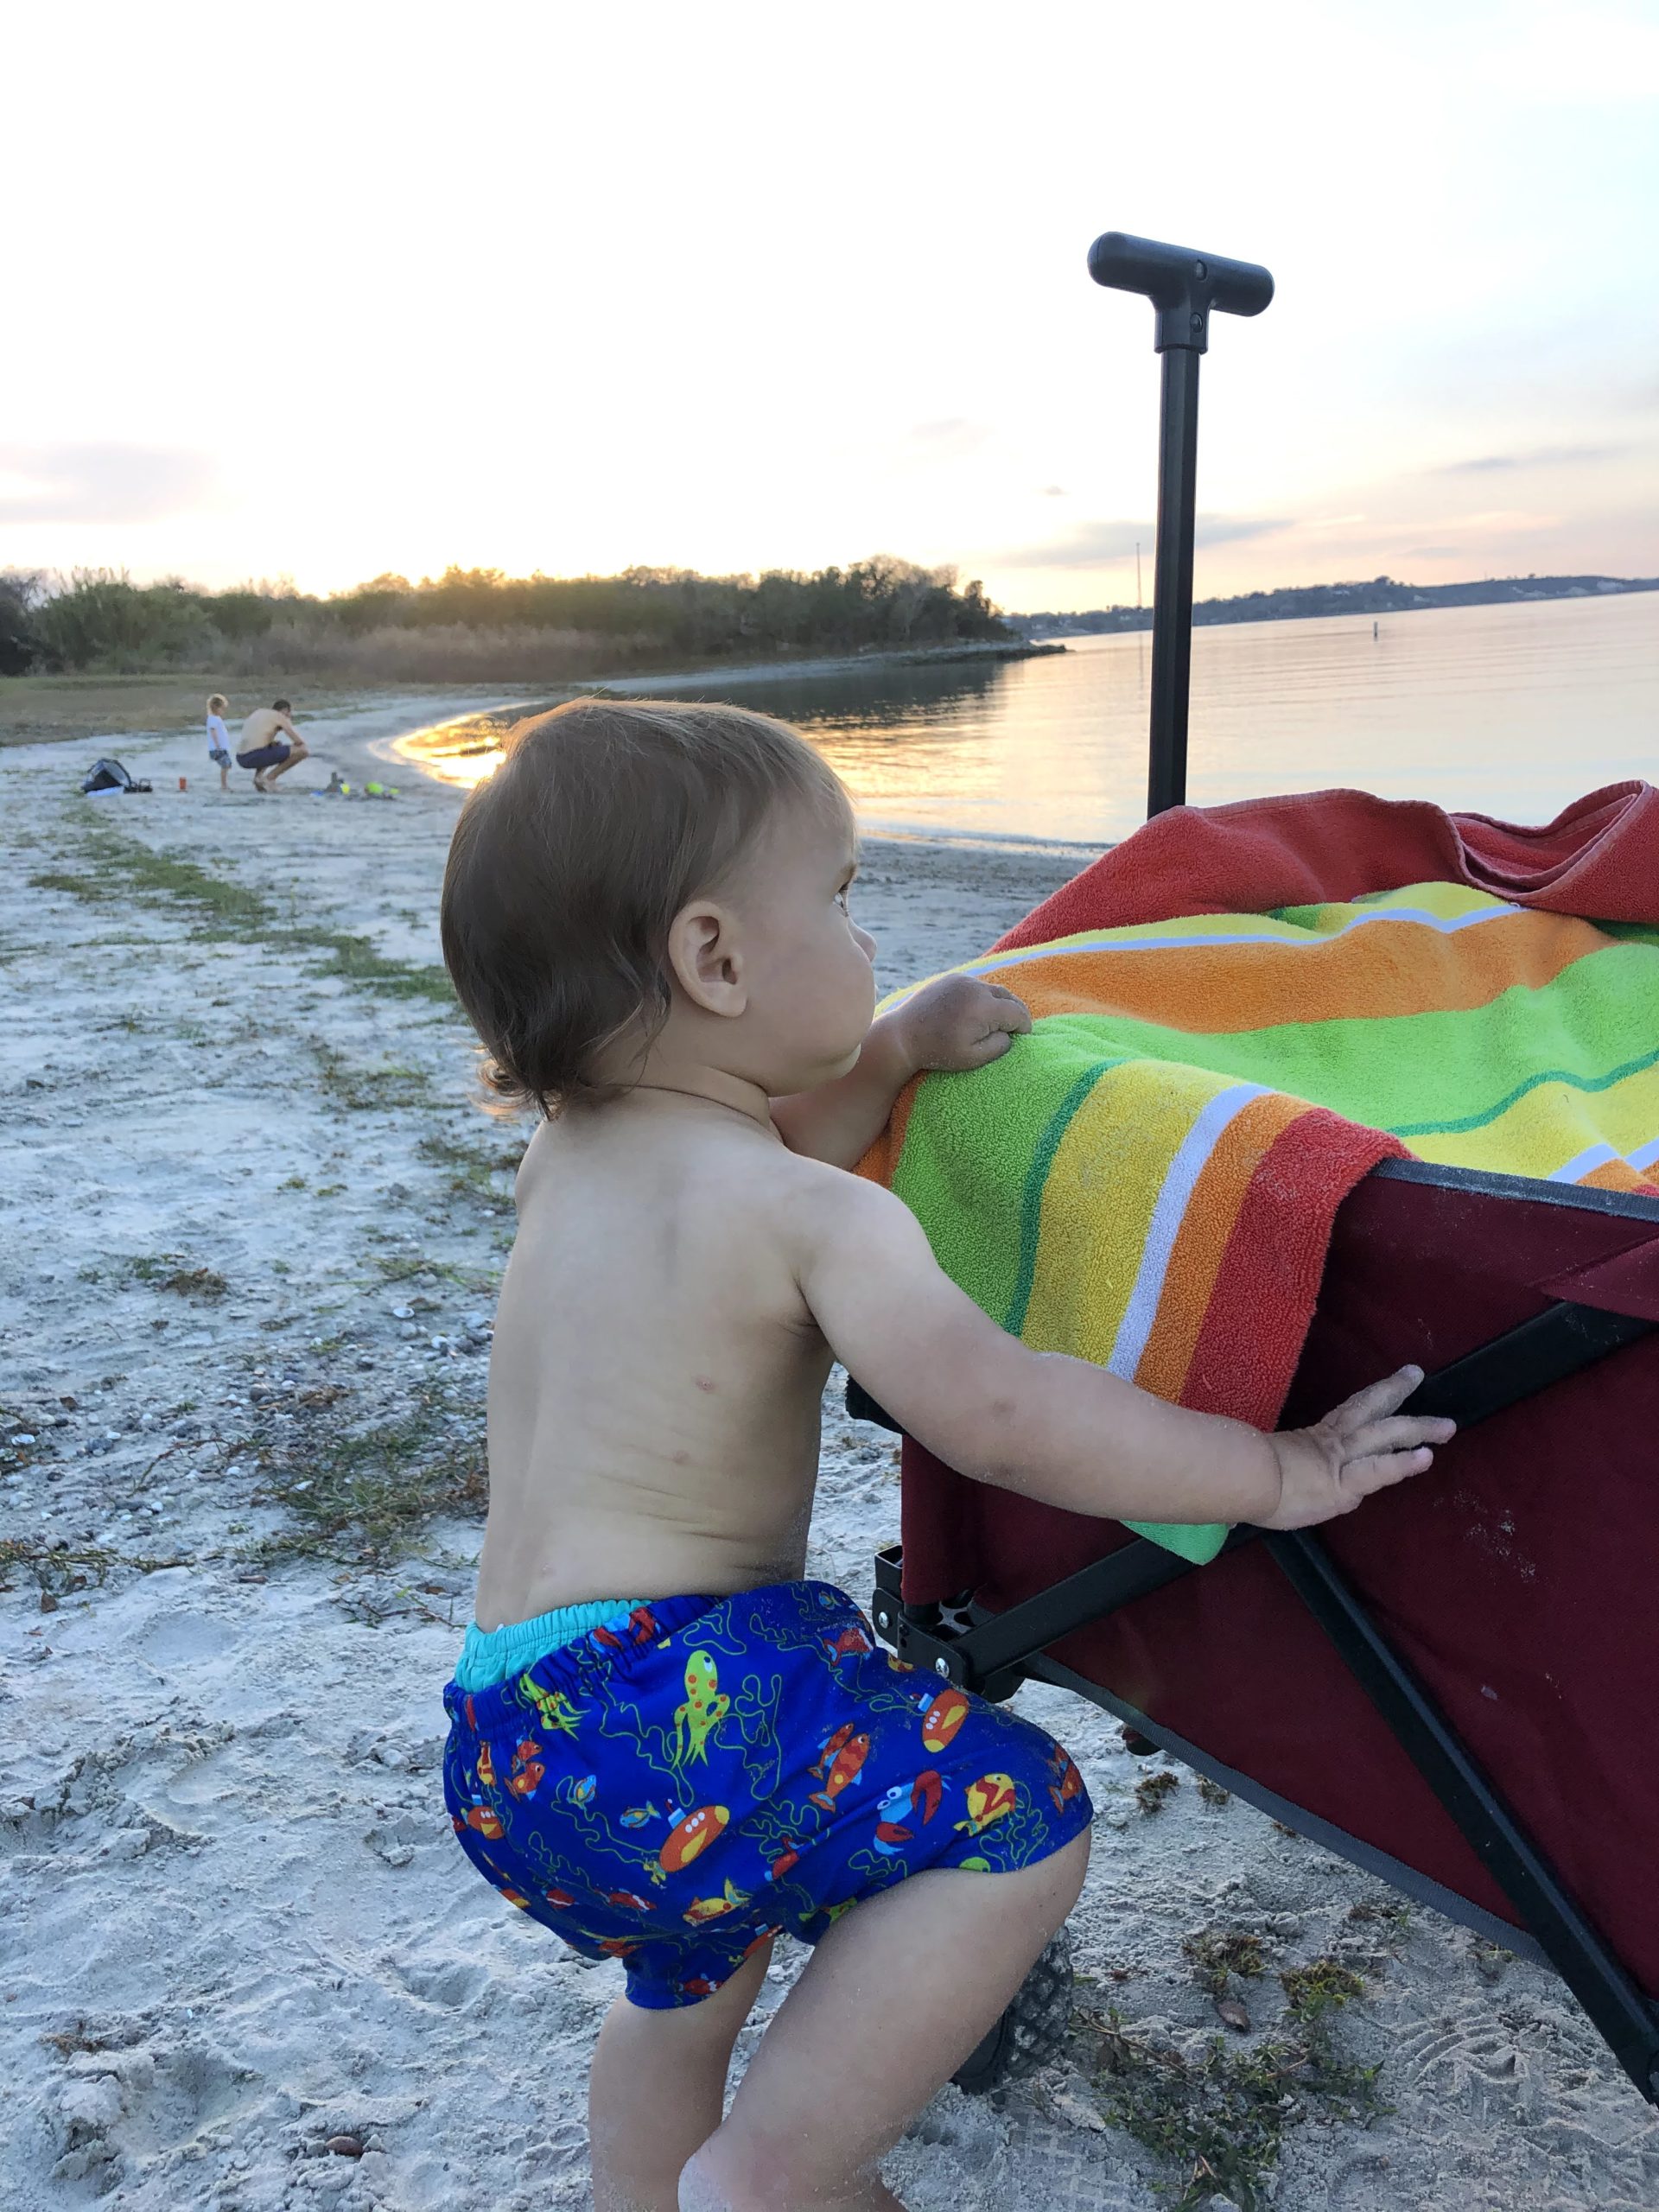 Toddler W hanging at the beach